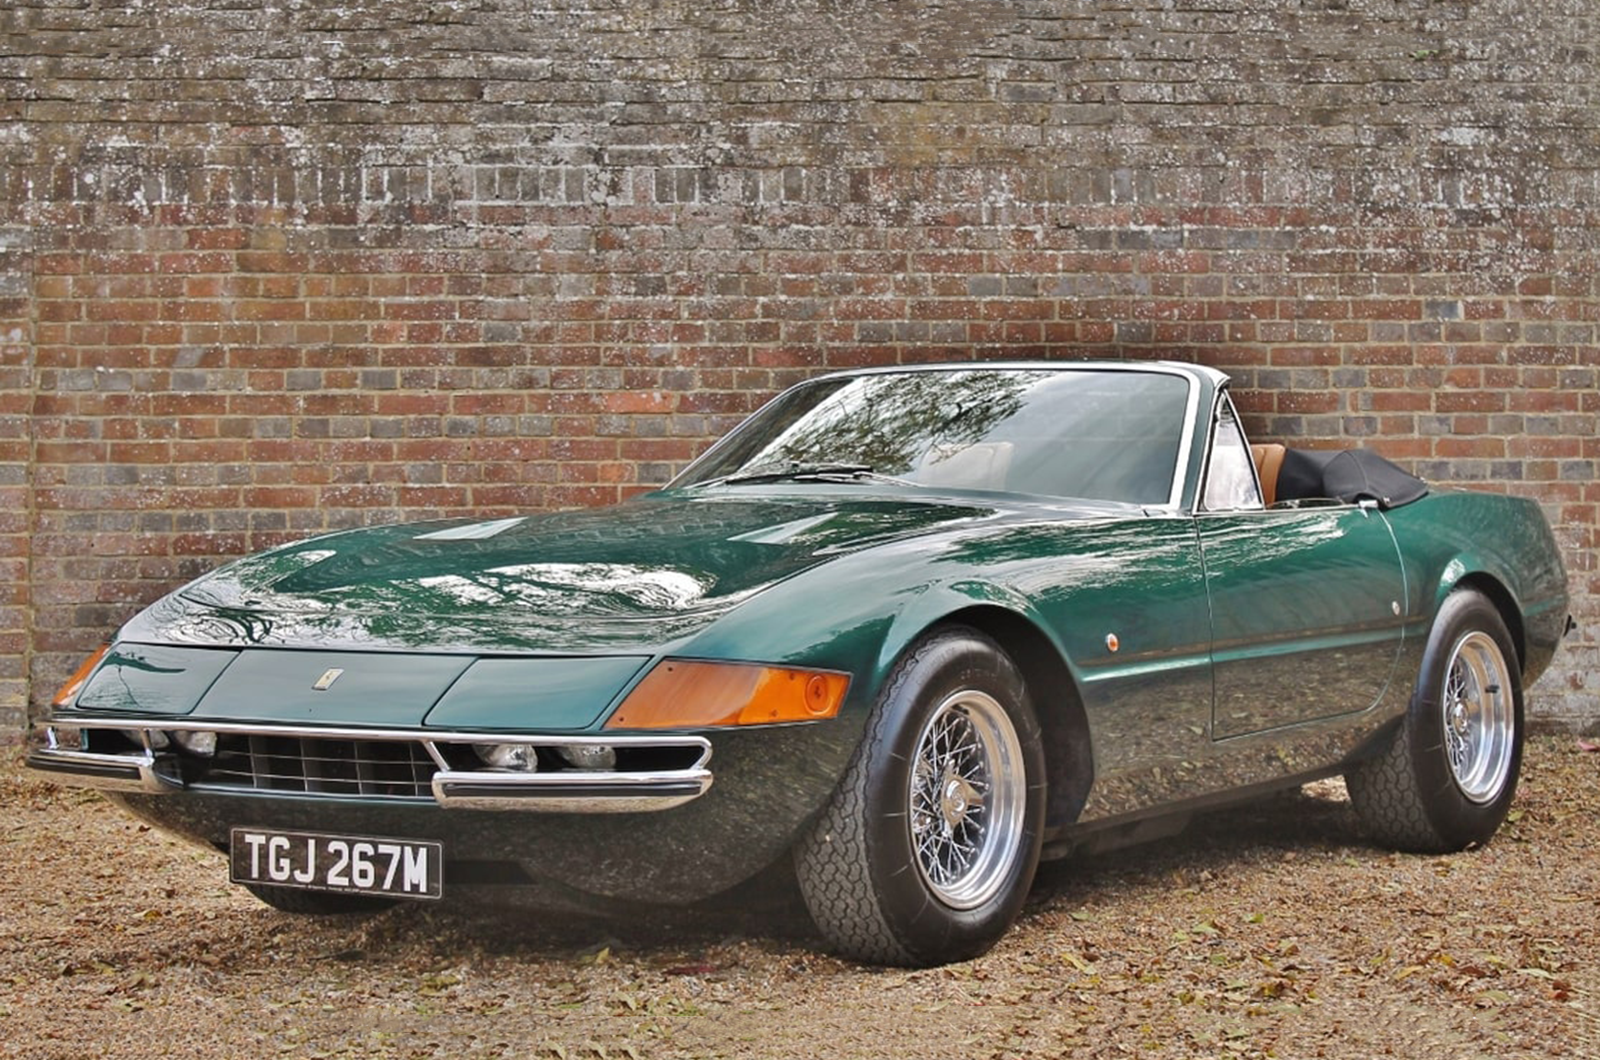 Classic & Sports Car – Our 15 favourite cars from Silverstone Auctions’ NEC Classic Motor Show 2018 auction